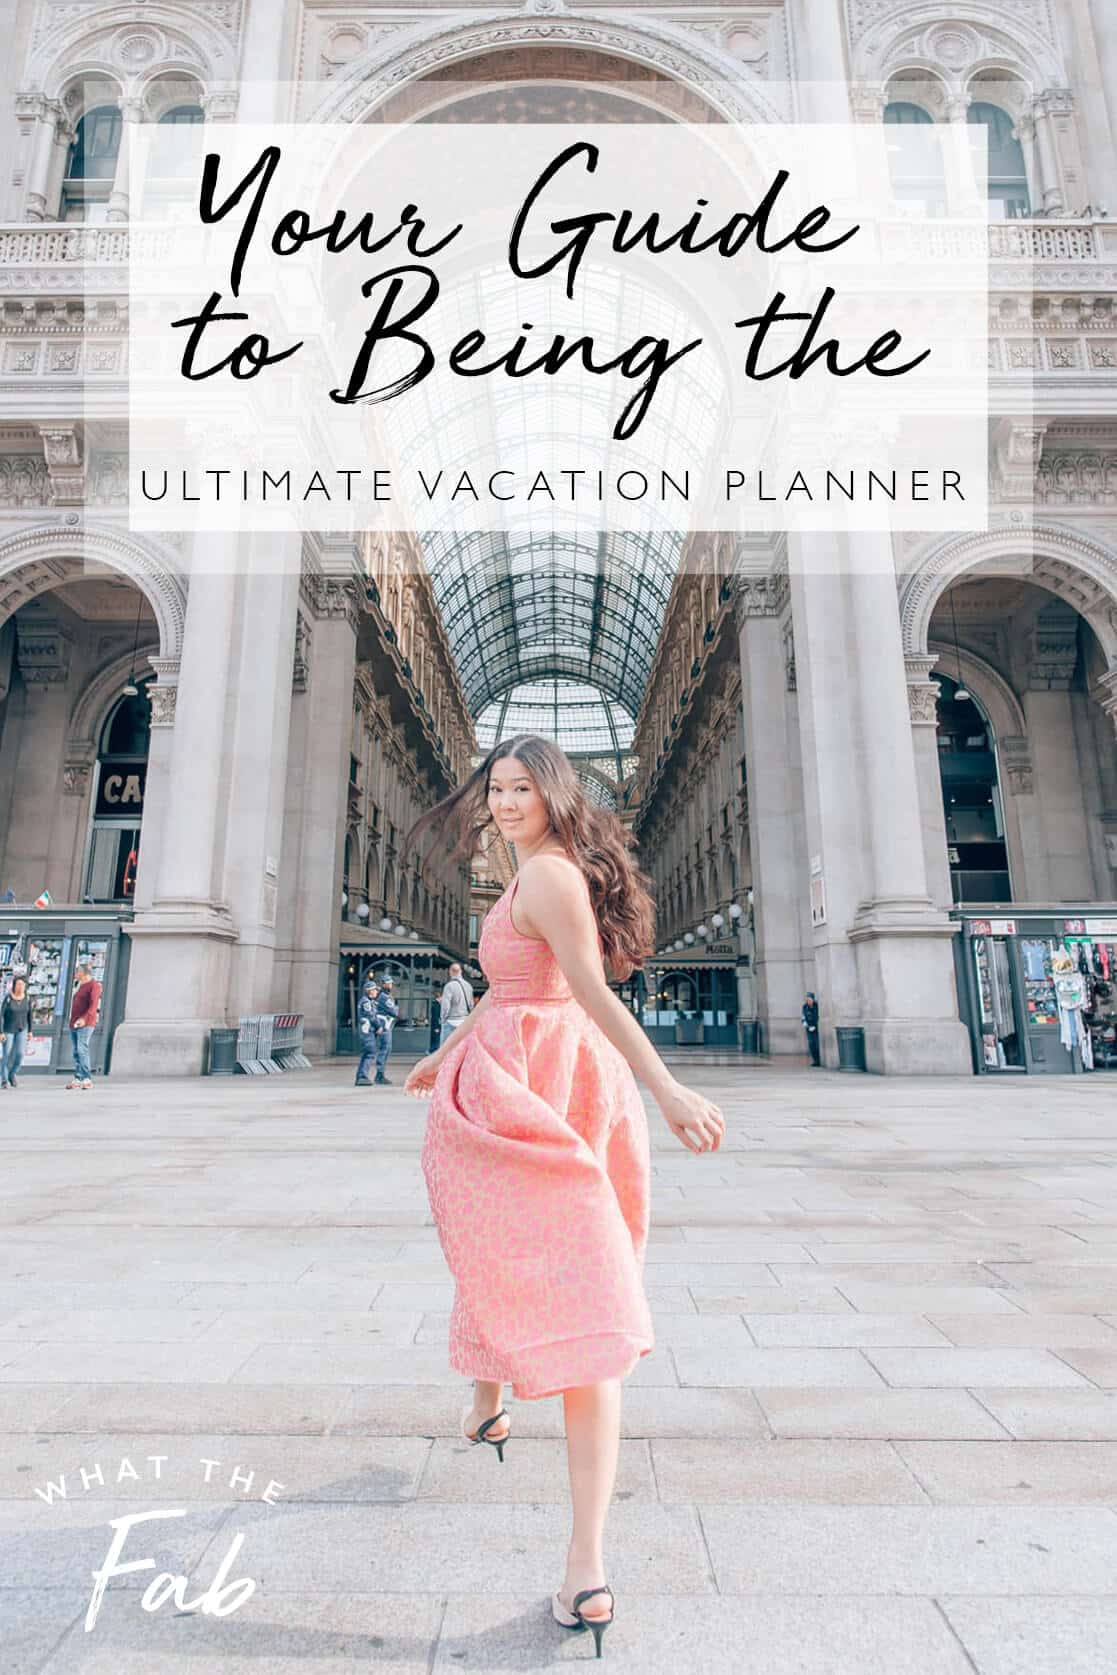 Vacation Planner